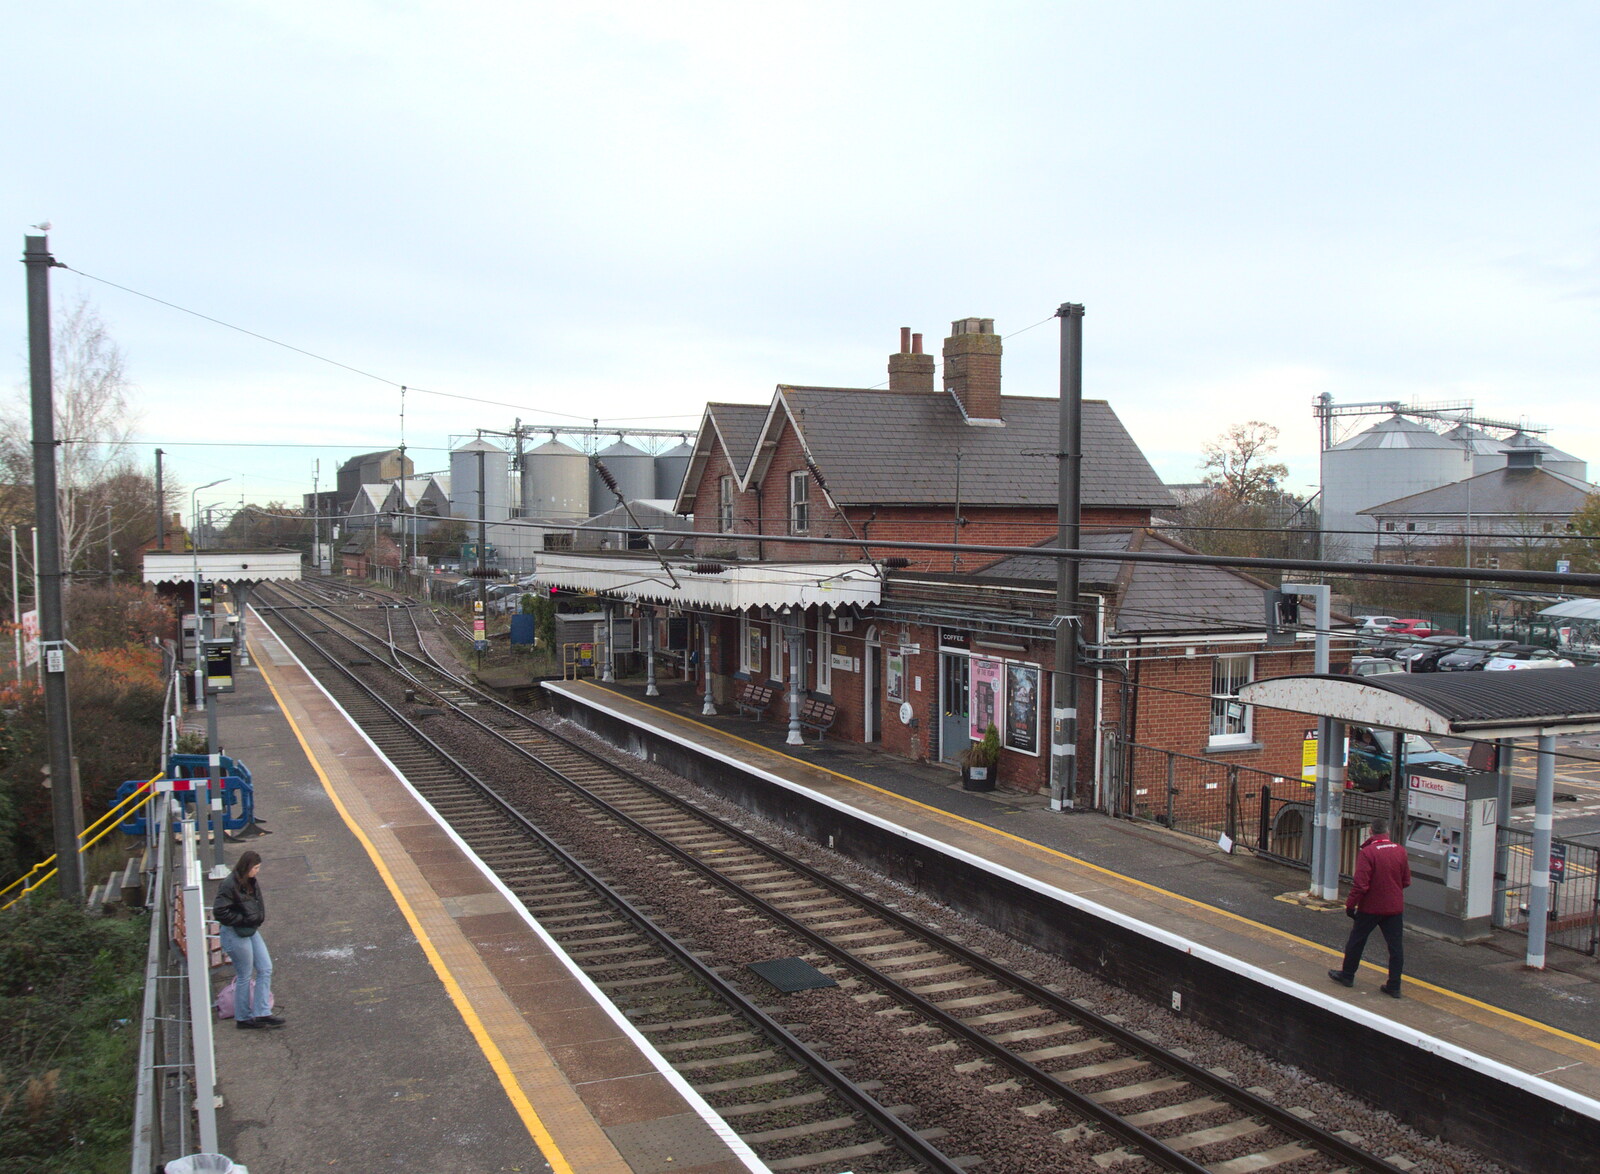 Diss station is still doing its thing from Lunch in Norwich and the GSB at Gislingham, Suffolk - 26th November 2022